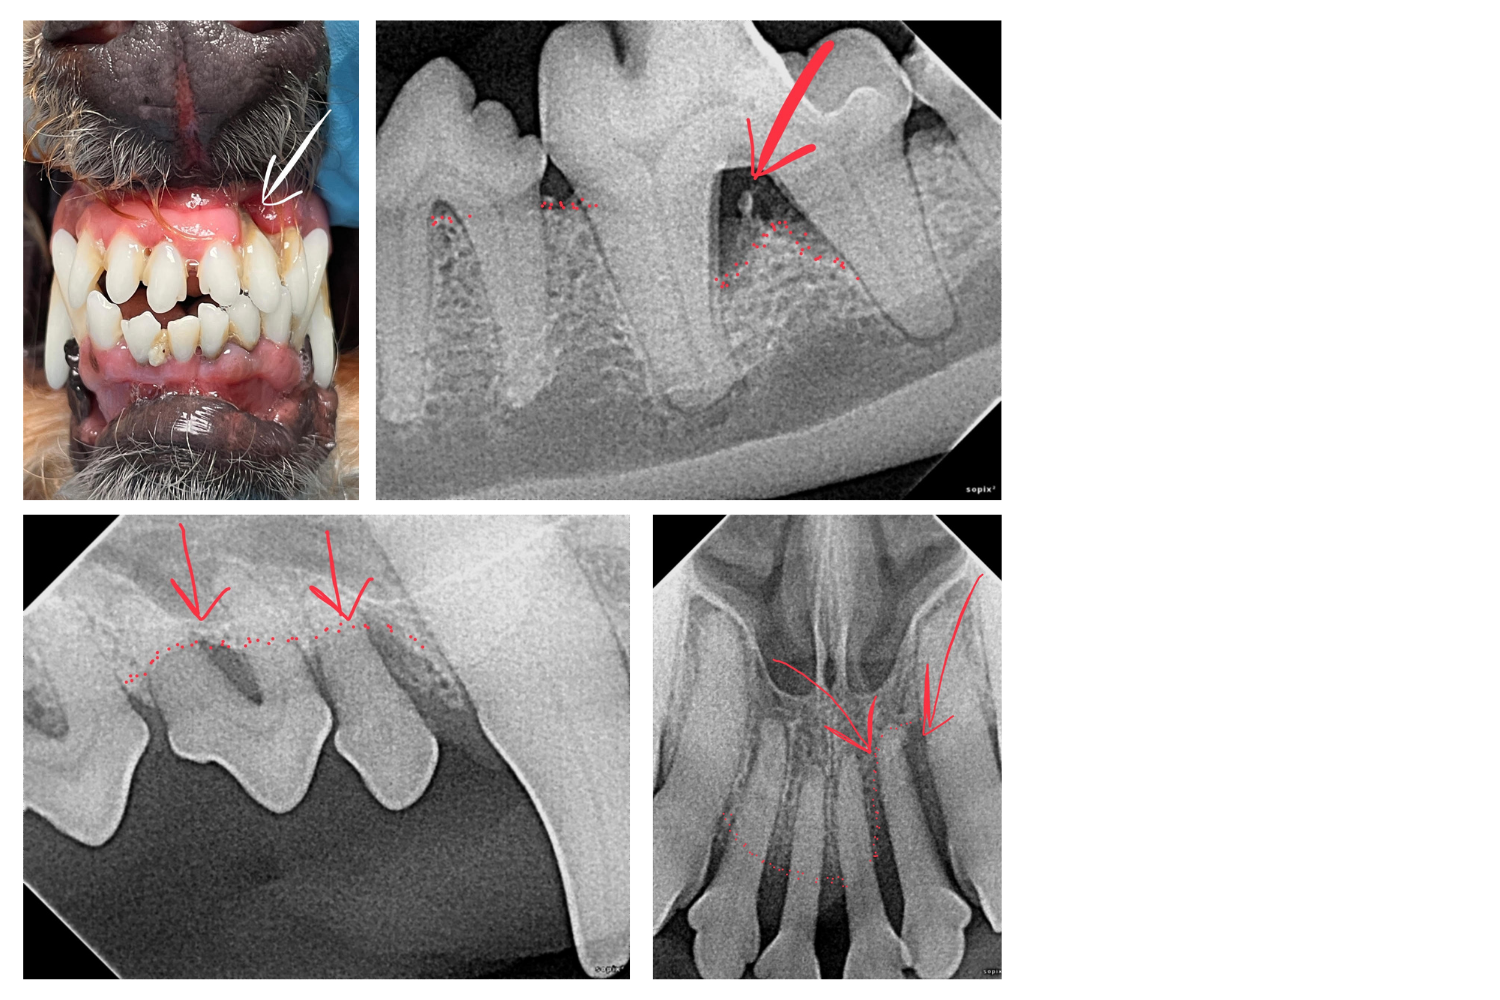 Figure 1. Intraoral Dental X-rays of Murphy, Showing Examples of Bone Loss, Bone Destruction, and Bone Infection

Images provided by Jon Klarsfeld, DVM, practice limited to veterinary dentistry.